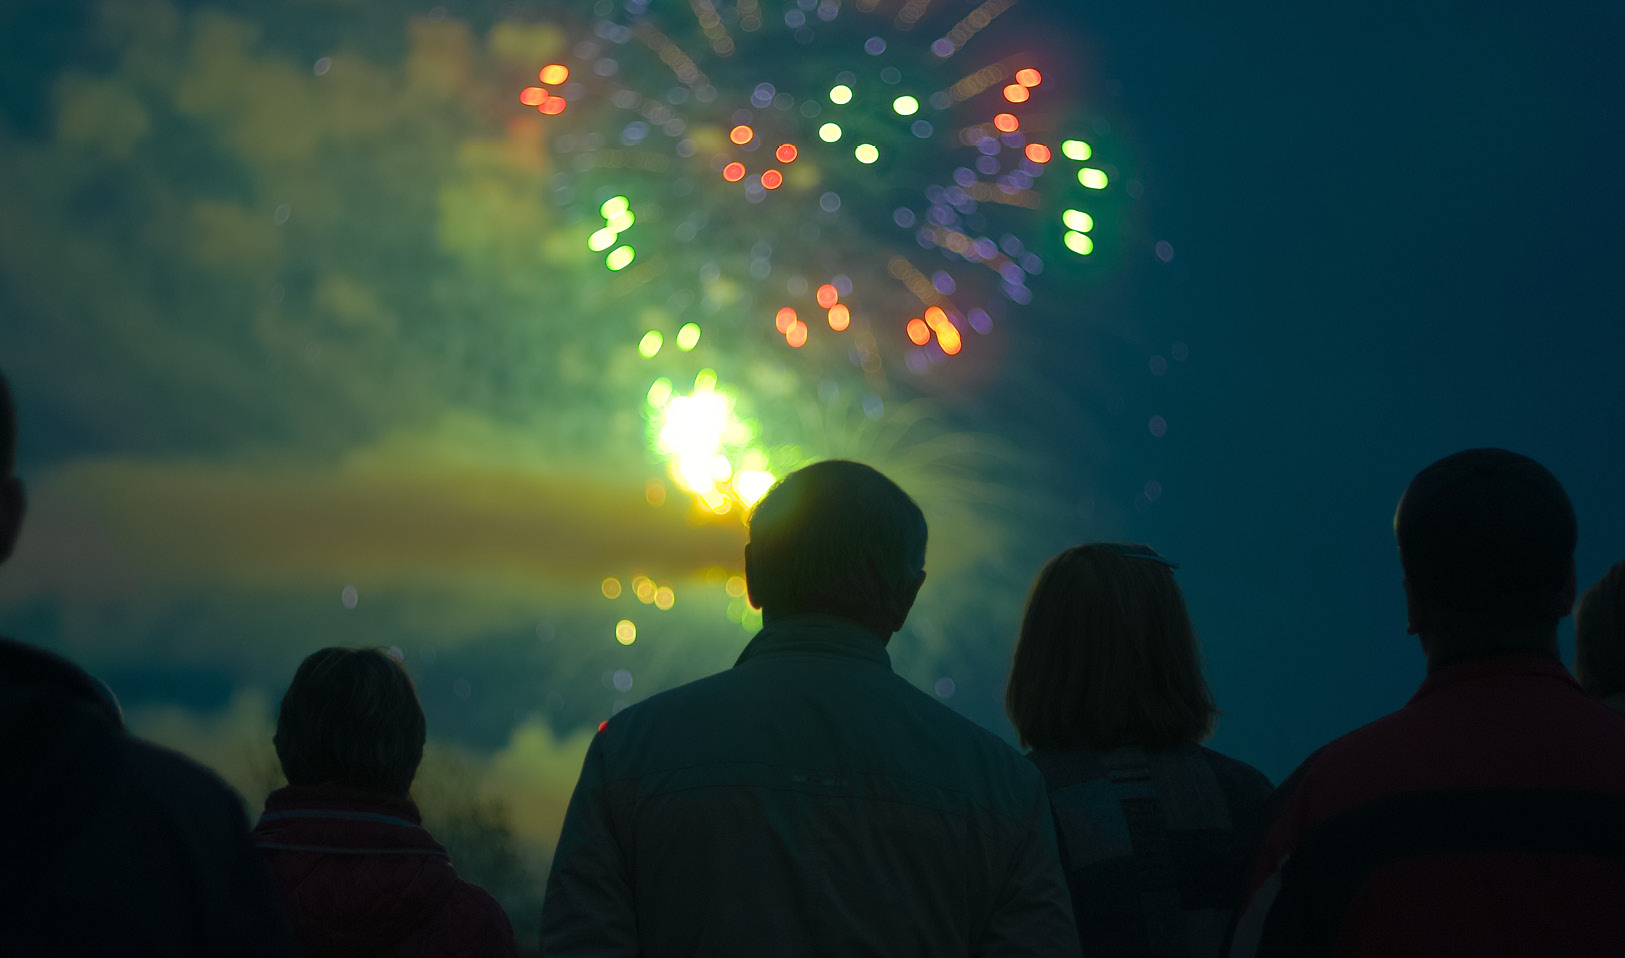 Fireworks night at the 鶹ý open to the public October events, local community